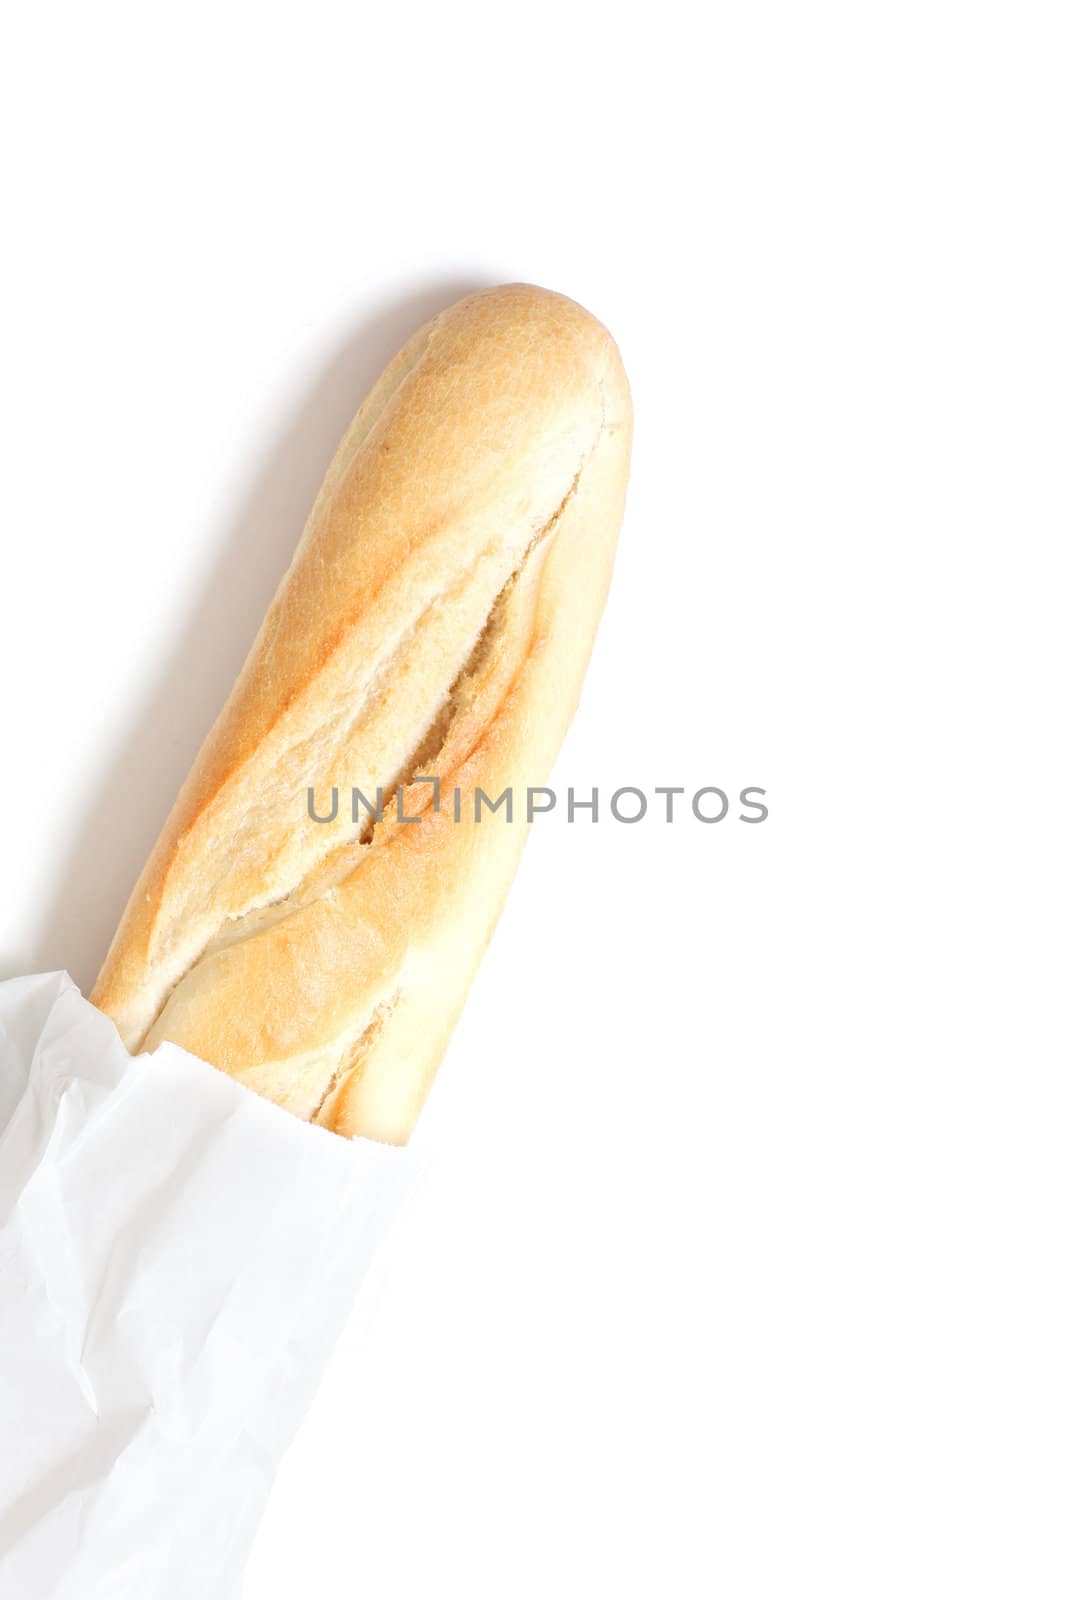 A French baguette in a bag